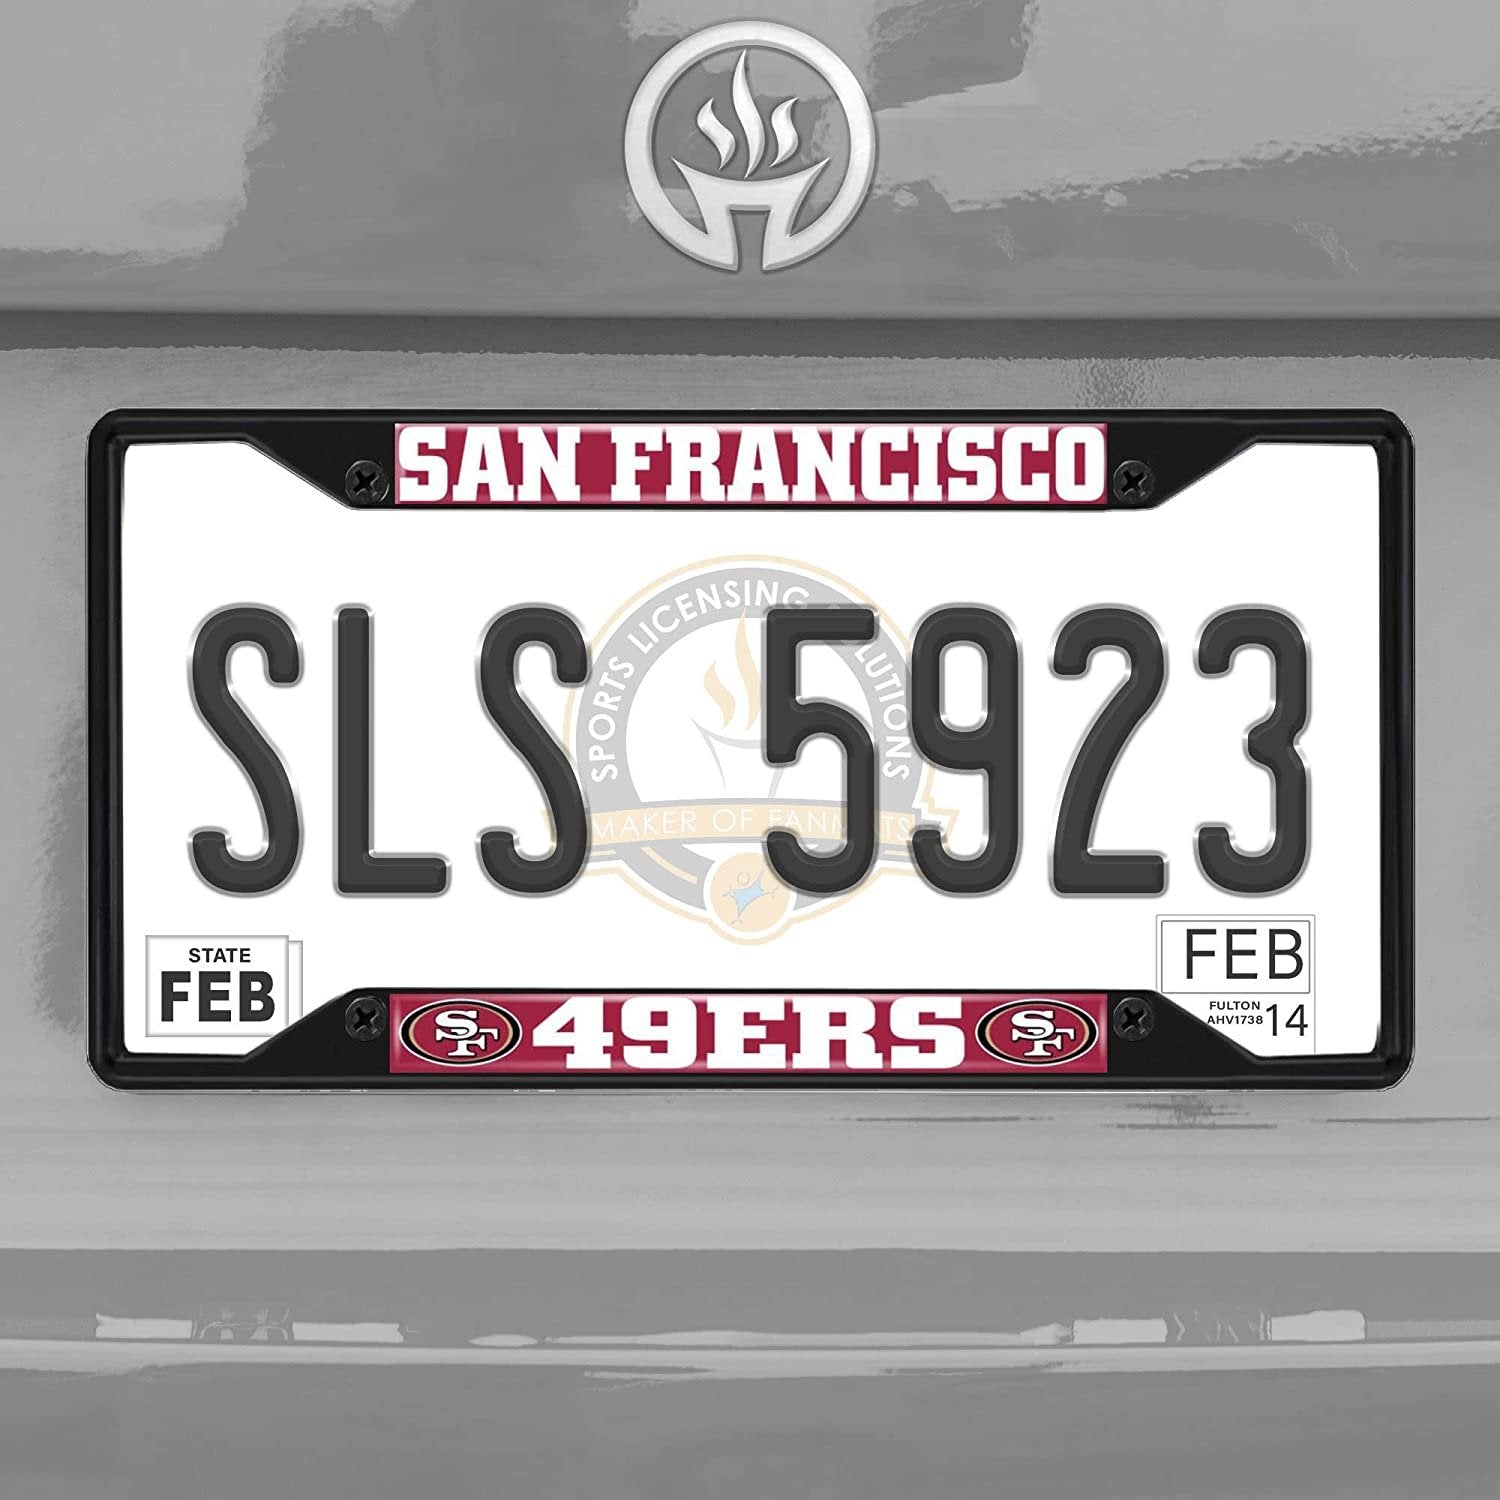 San Francisco 49ers Black Metal License Plate Frame Tag Cover, 6x12 Inch